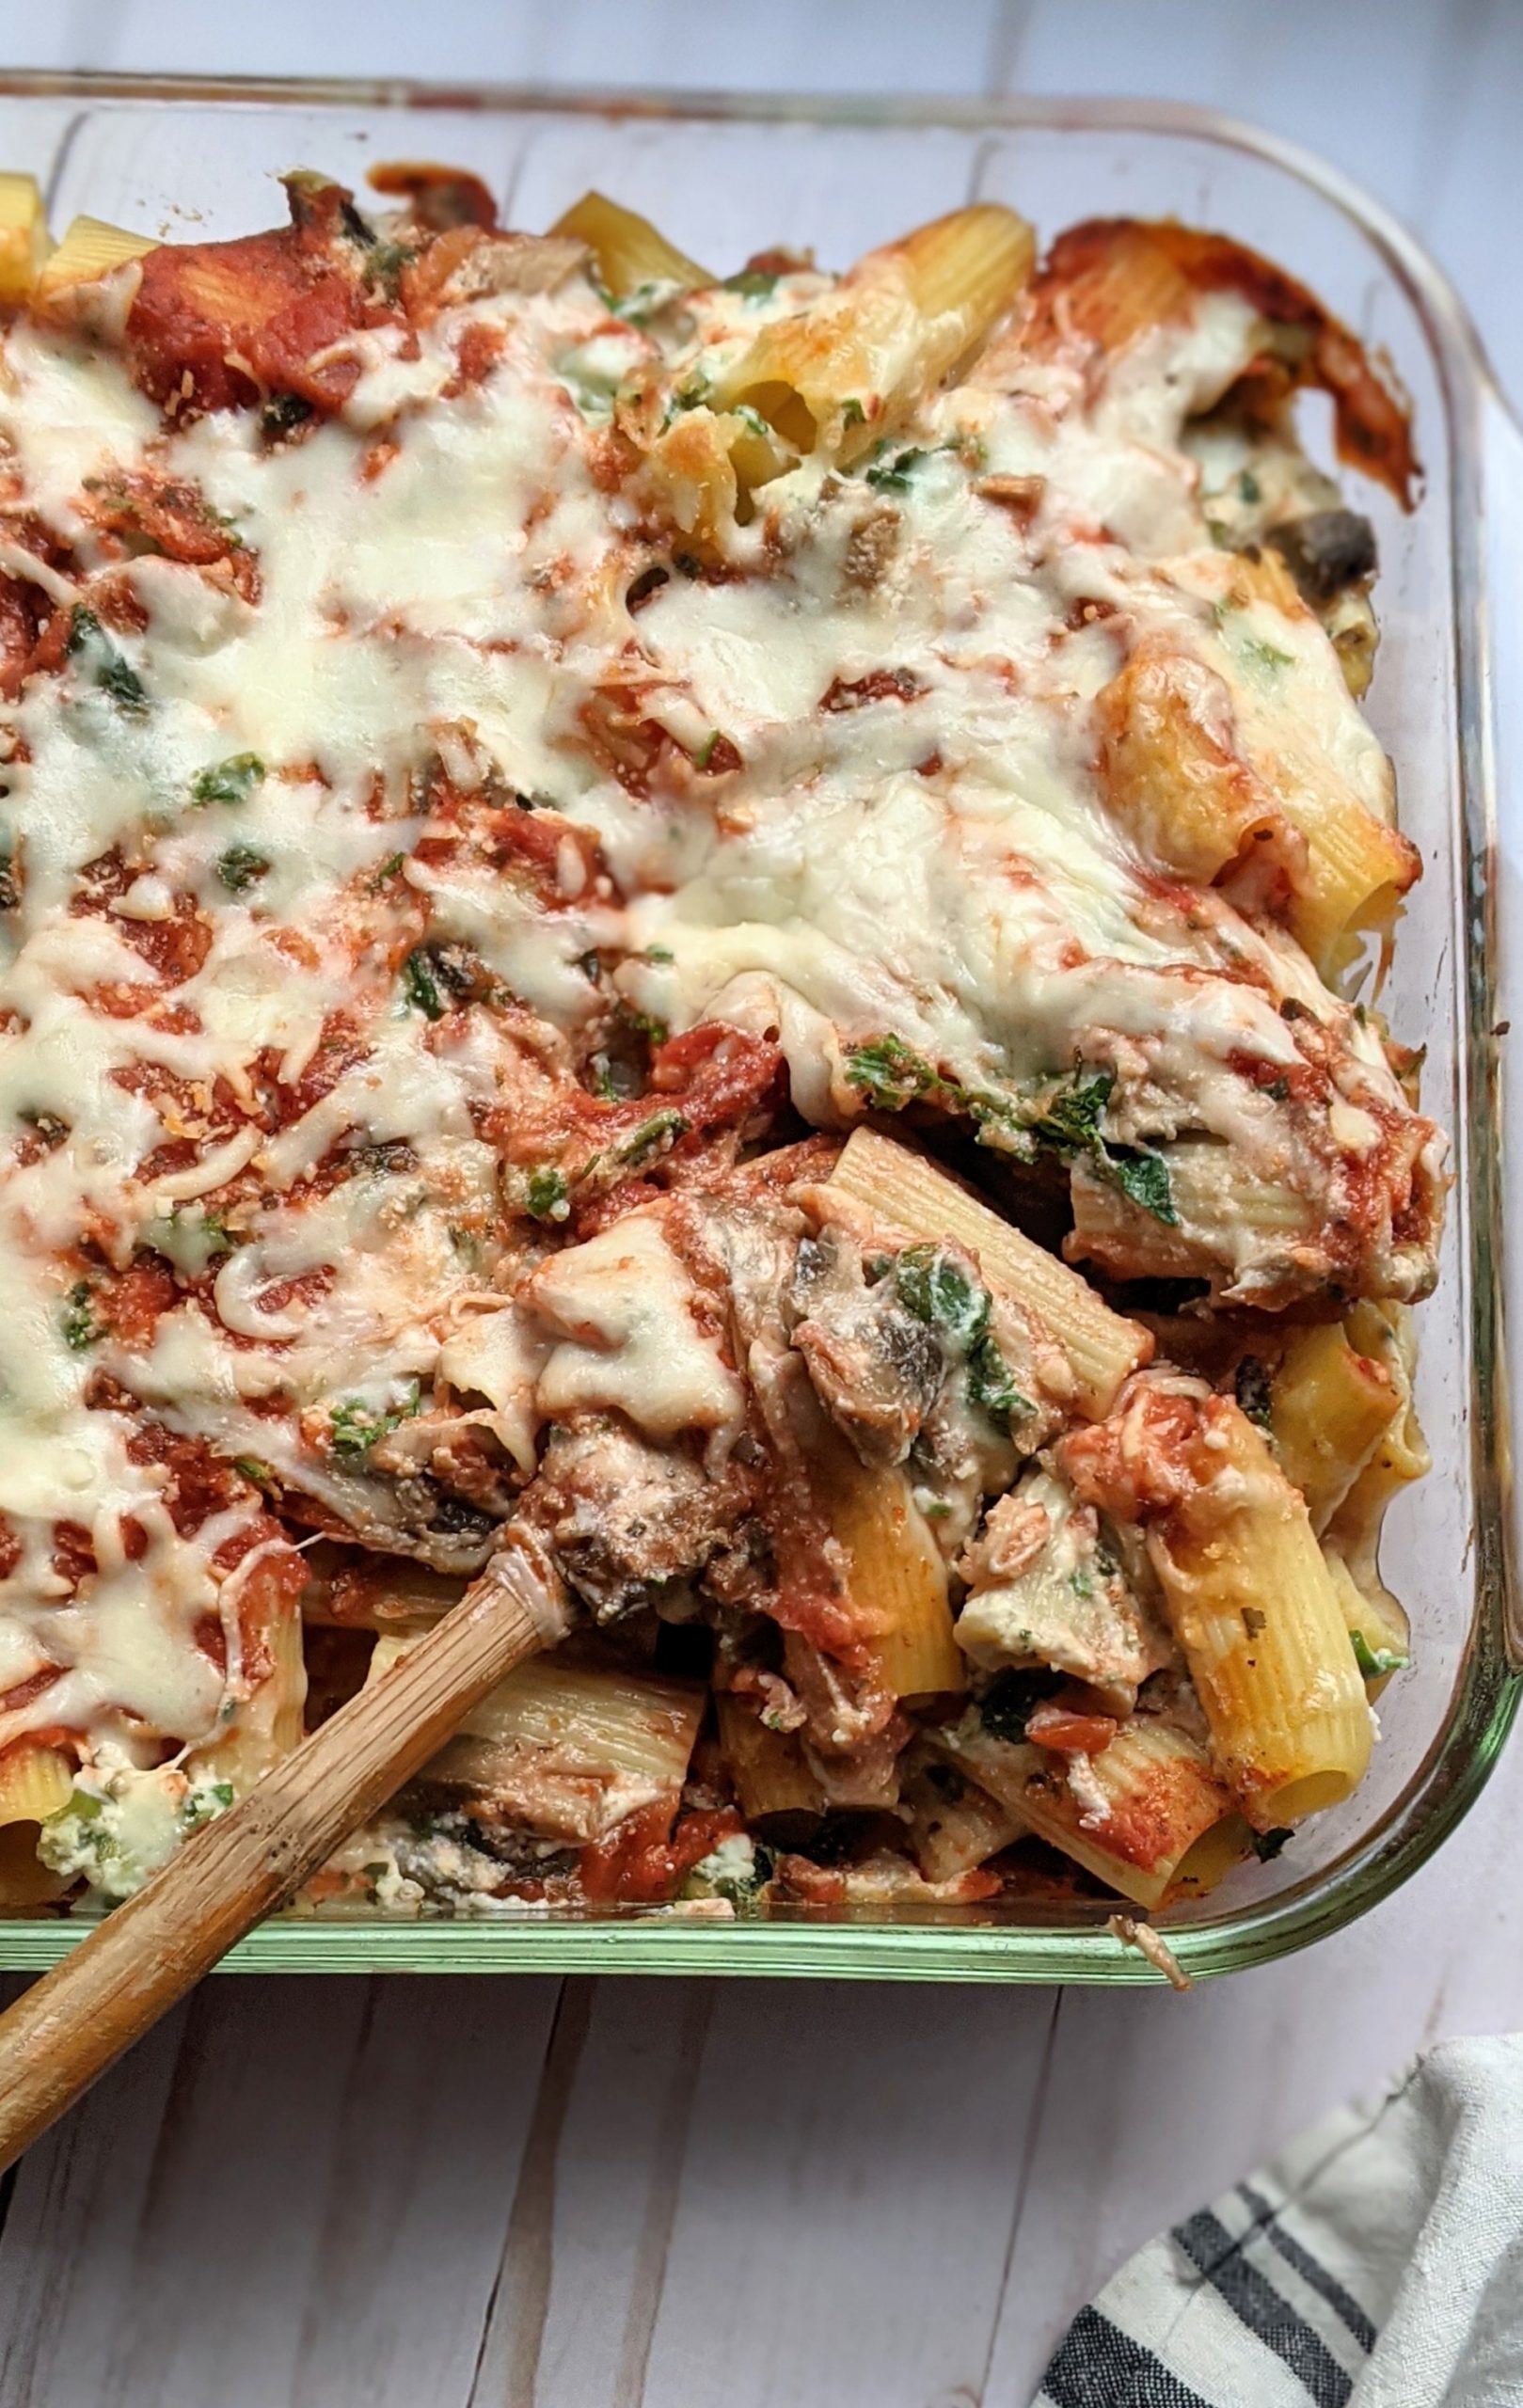 baked ziti recipe without meat vegetarian pasta bake with mozzarella ricotta cheese spinach mushrooms kale parsley and zucchini meatless pasta bake recipes holiday dinner ideas without meat